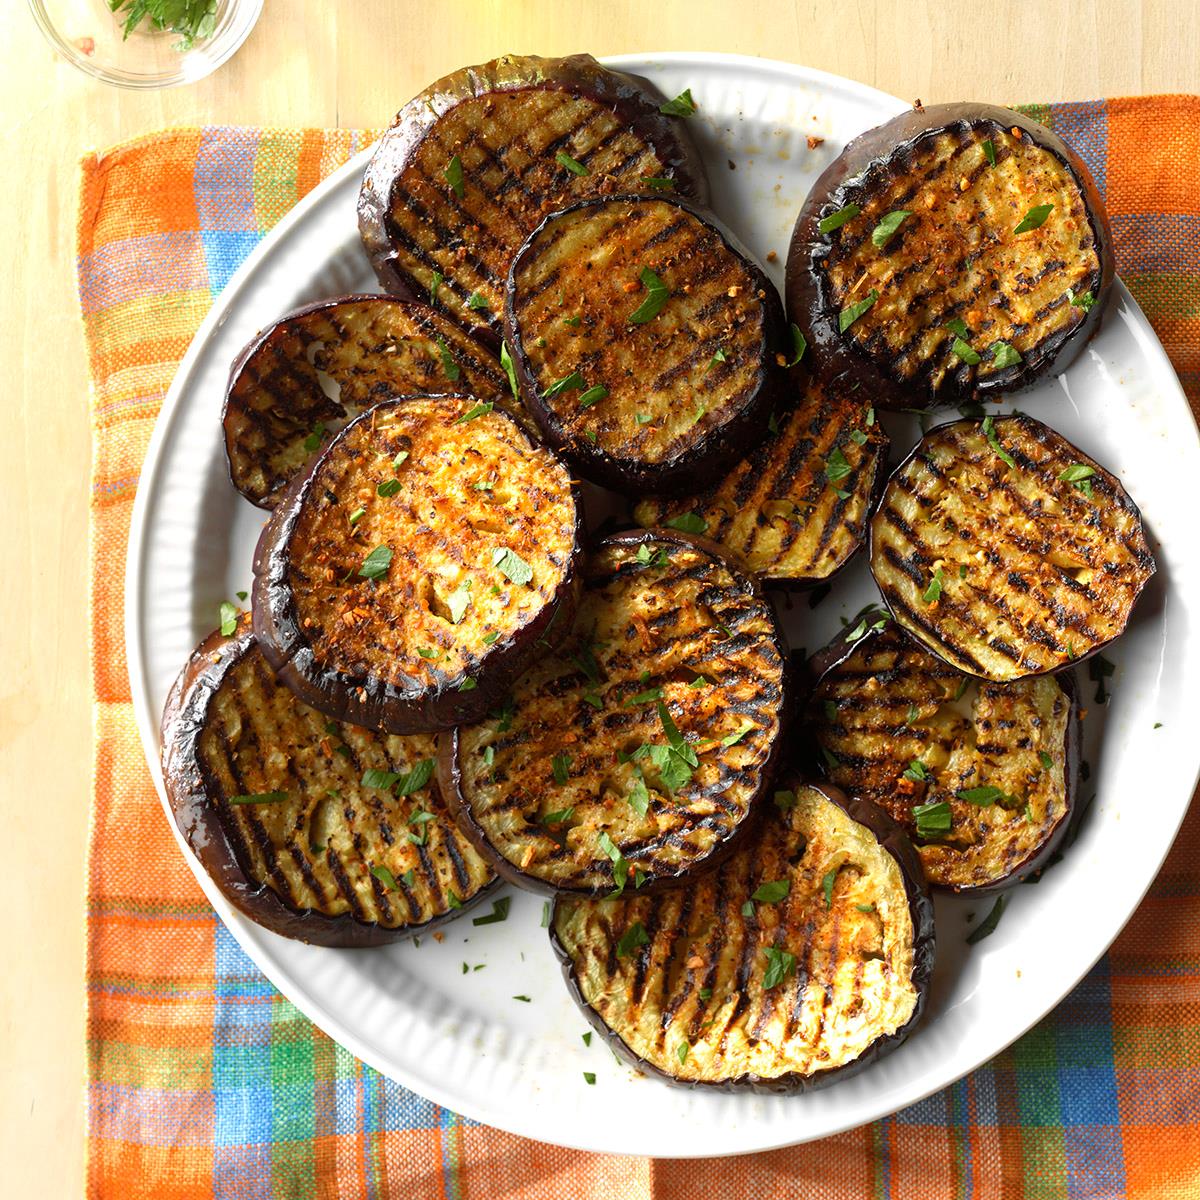 Spicy Grilled Eggplant Recipe Taste Of Home,How To Make Salmon Patties Easy